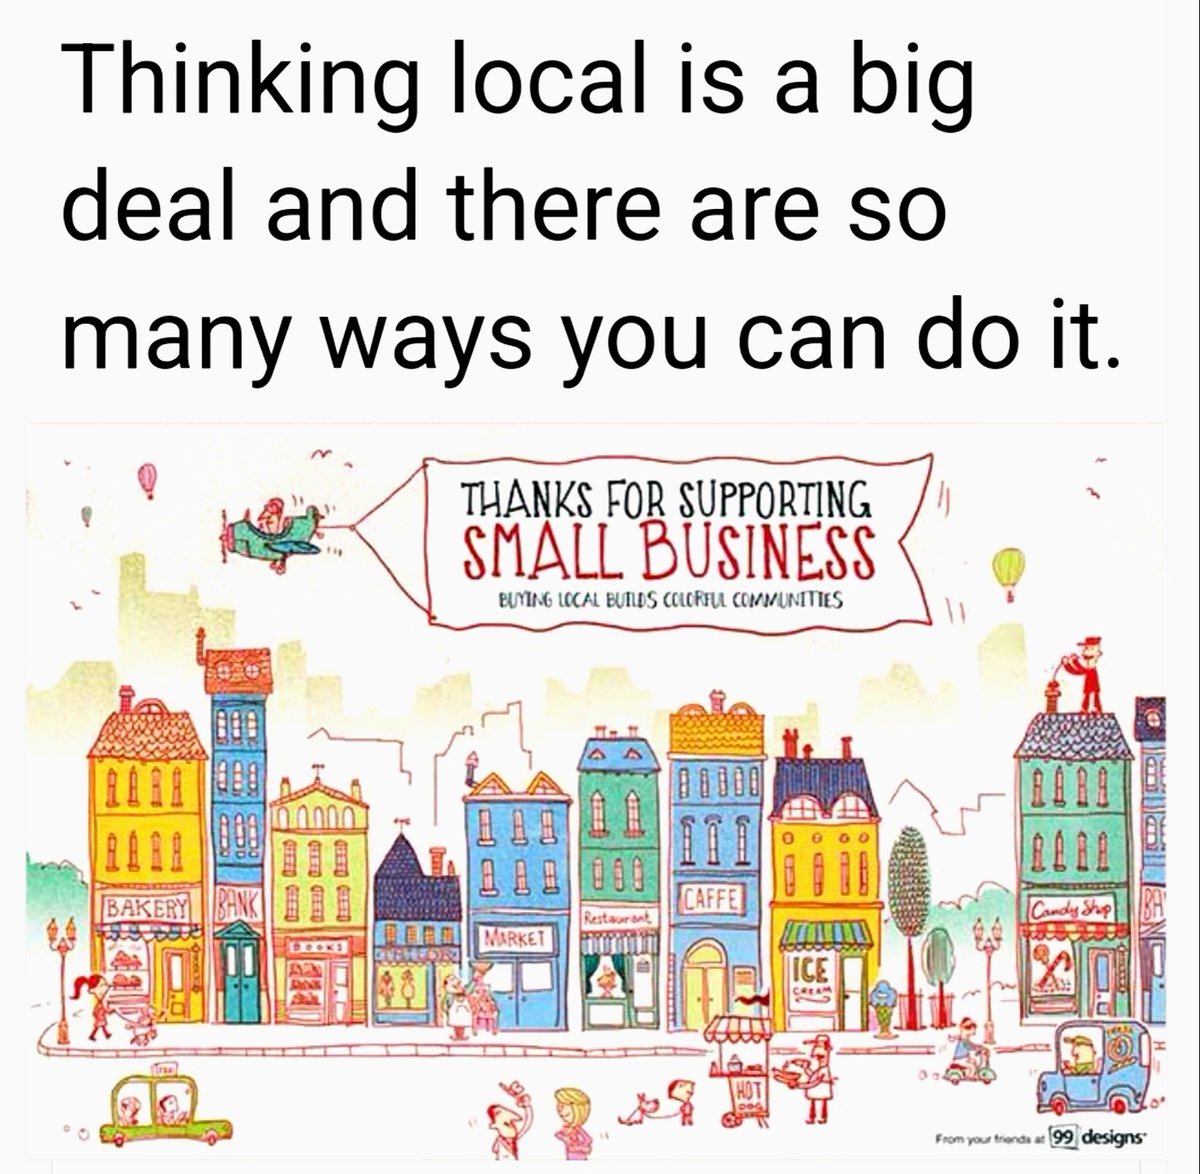 Spending with an independent instead of a chain store means the choice to support local business owners. #buylocal #smallbusinessmatters